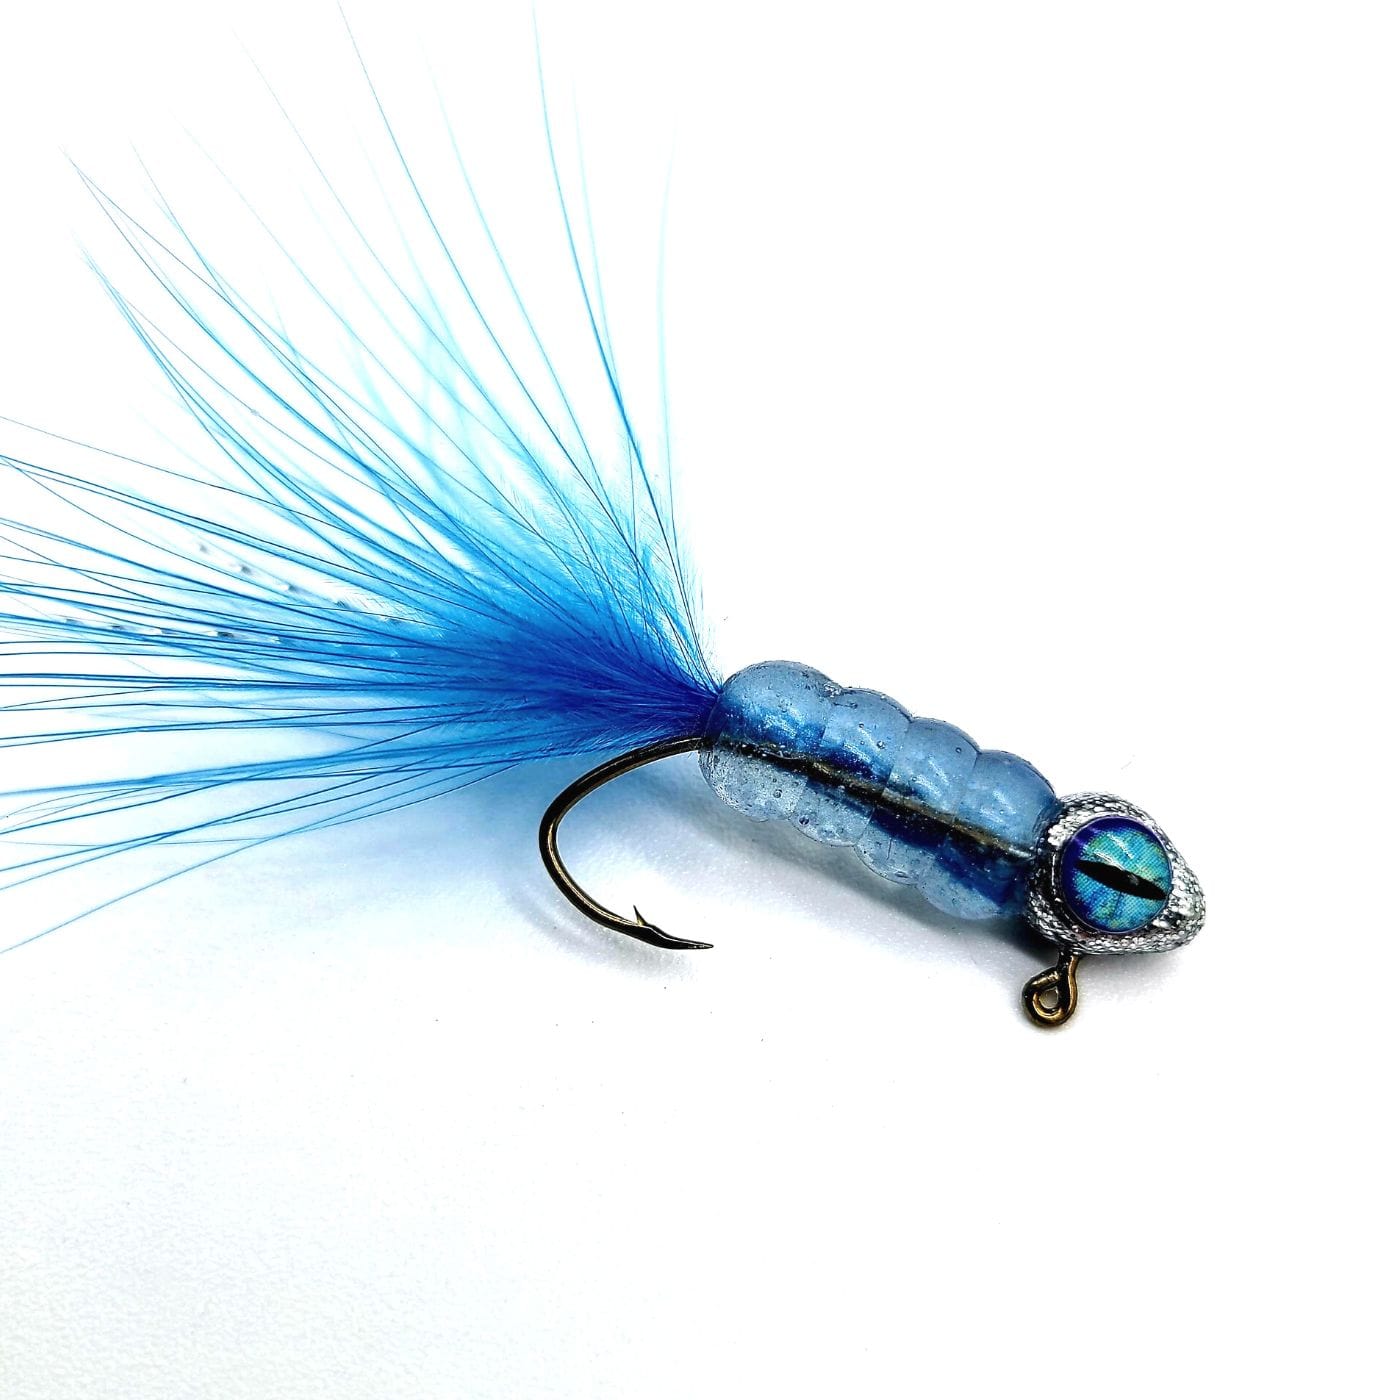 Tying an EASY Crappie Jig - Step by Step Tutorial 